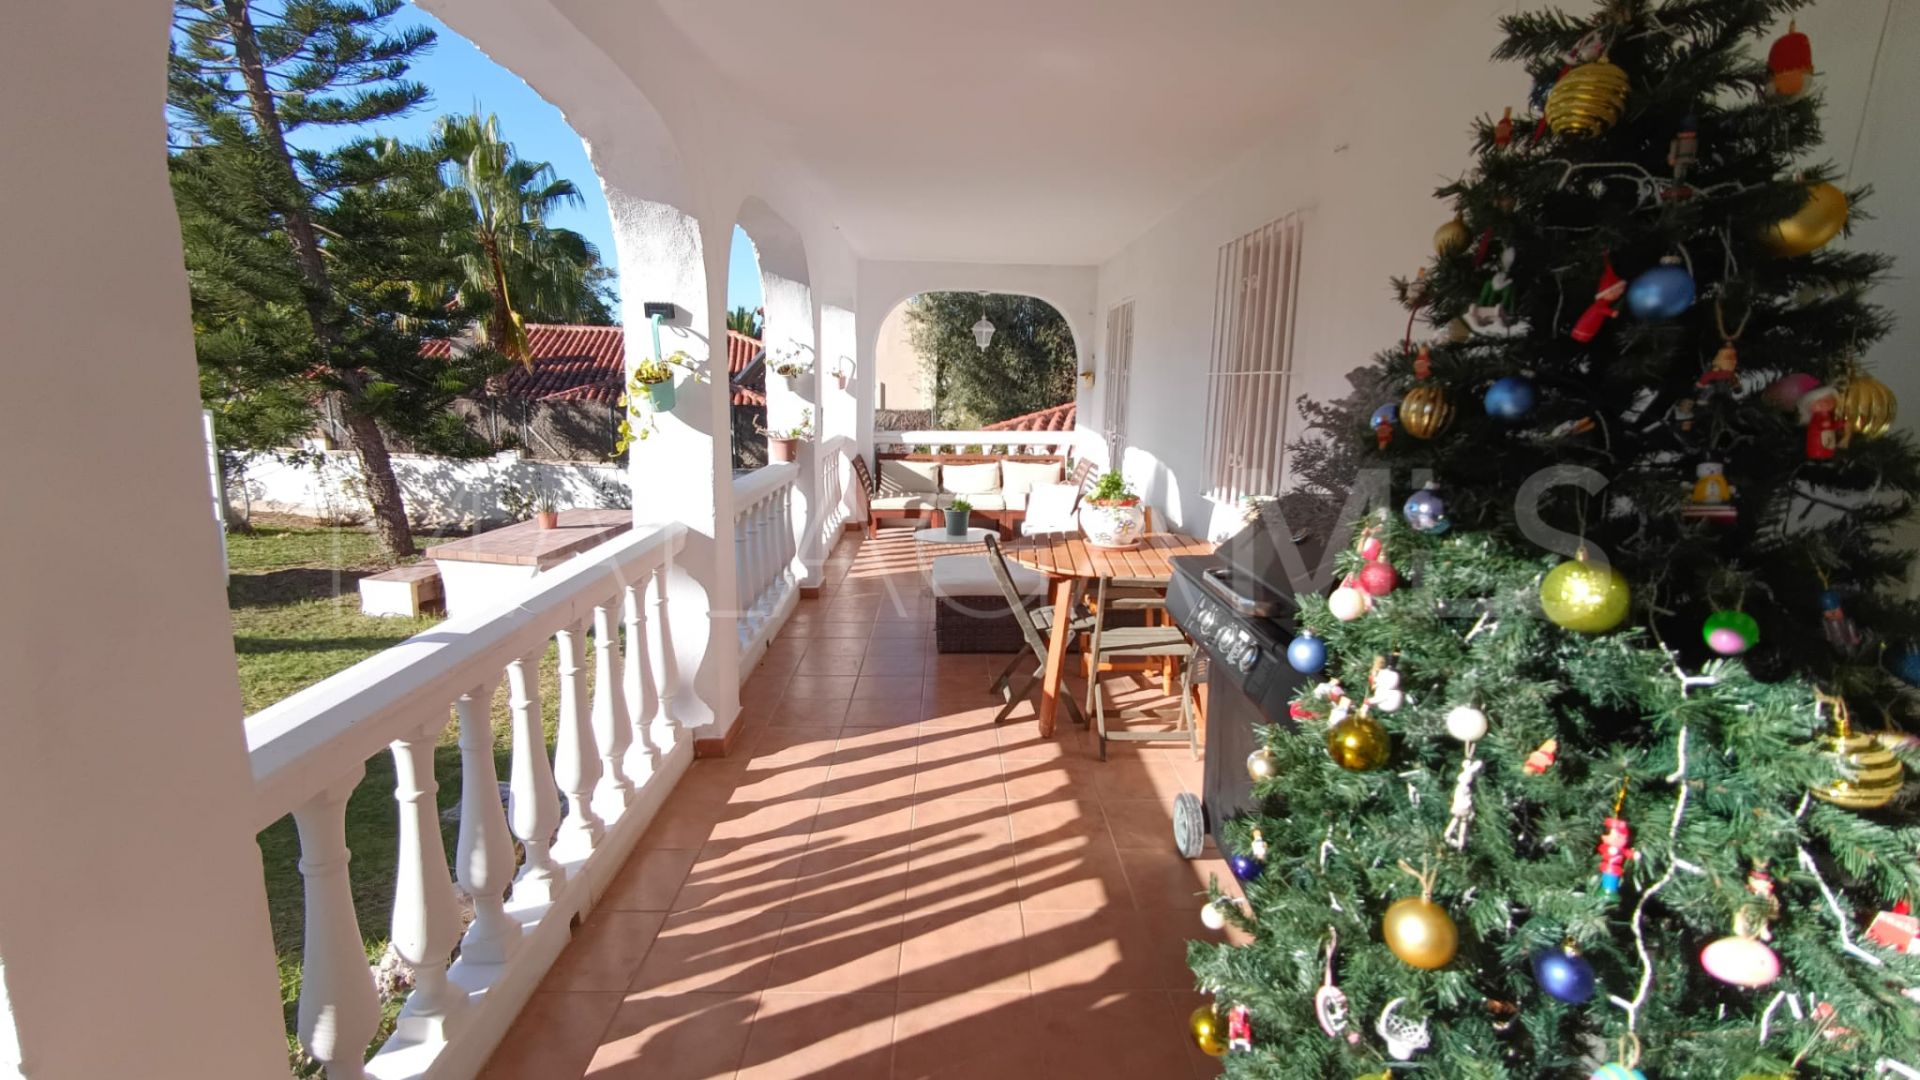 Villa for sale with 3 bedrooms in El Real Panorama